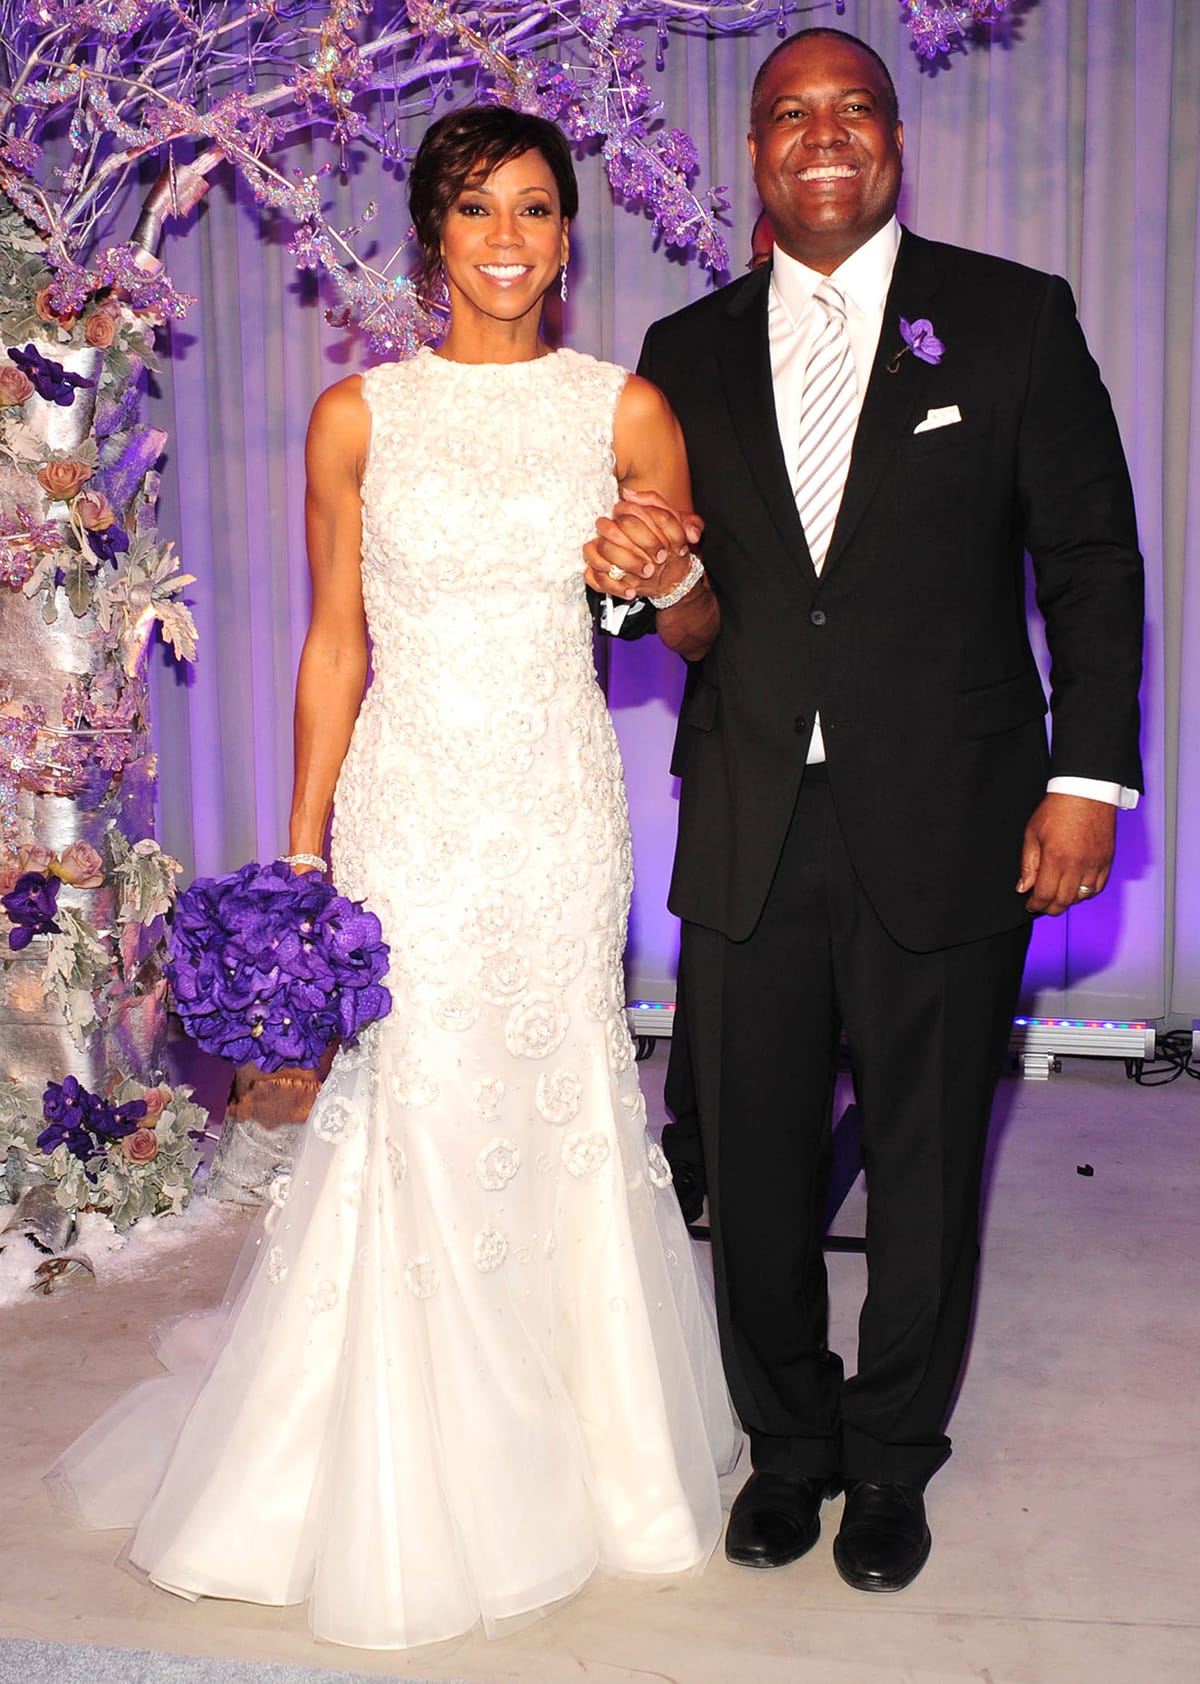 Rodney and Holly Peete emphasize that communication is the cornerstone of a resilient and enduring marriage